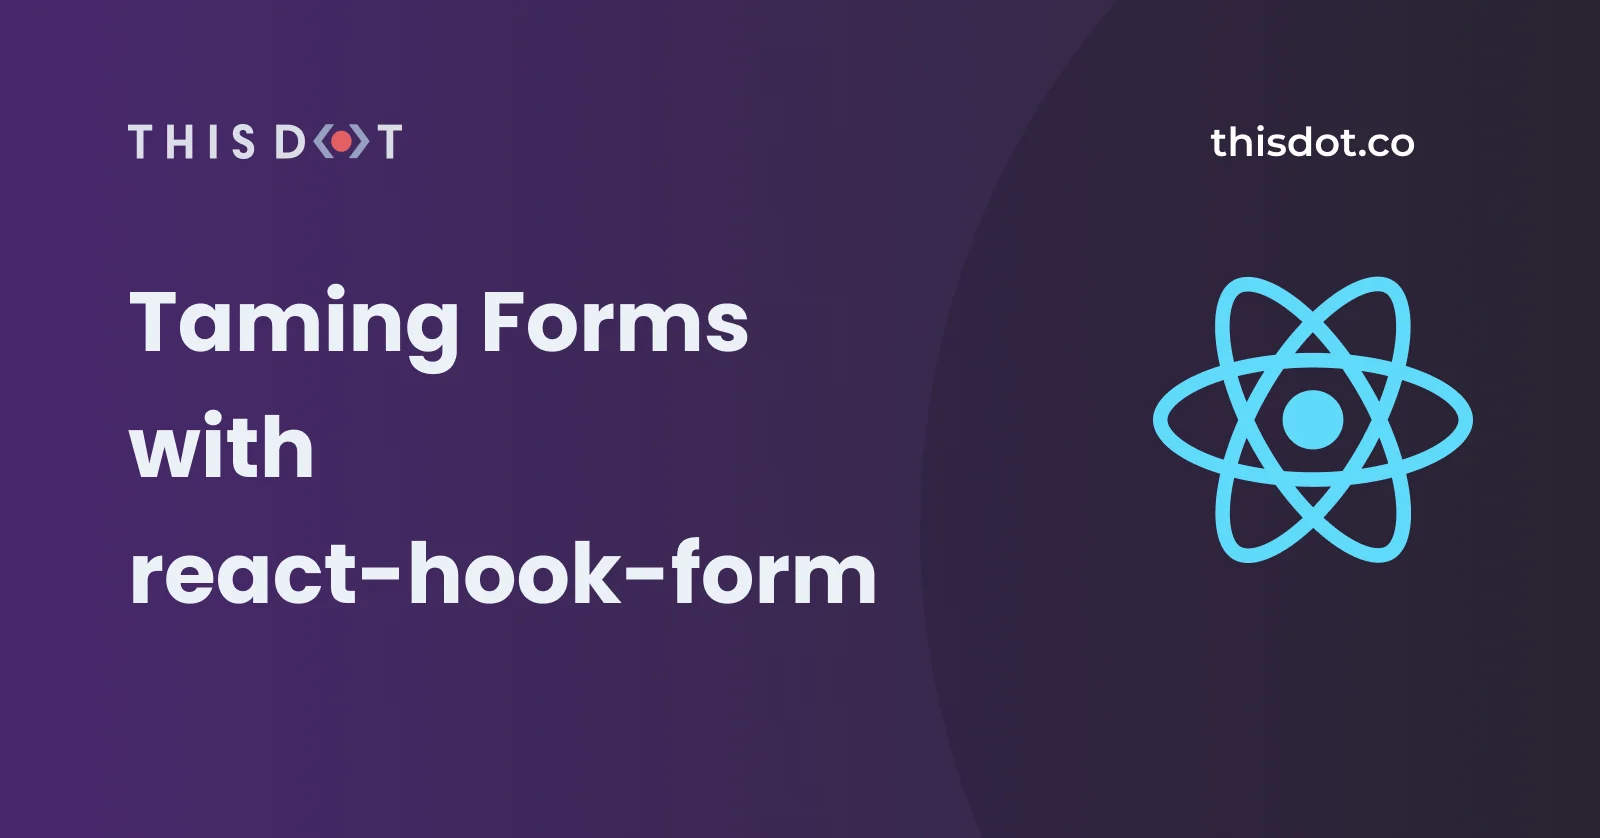 Taming Forms With react-hook-form cover image